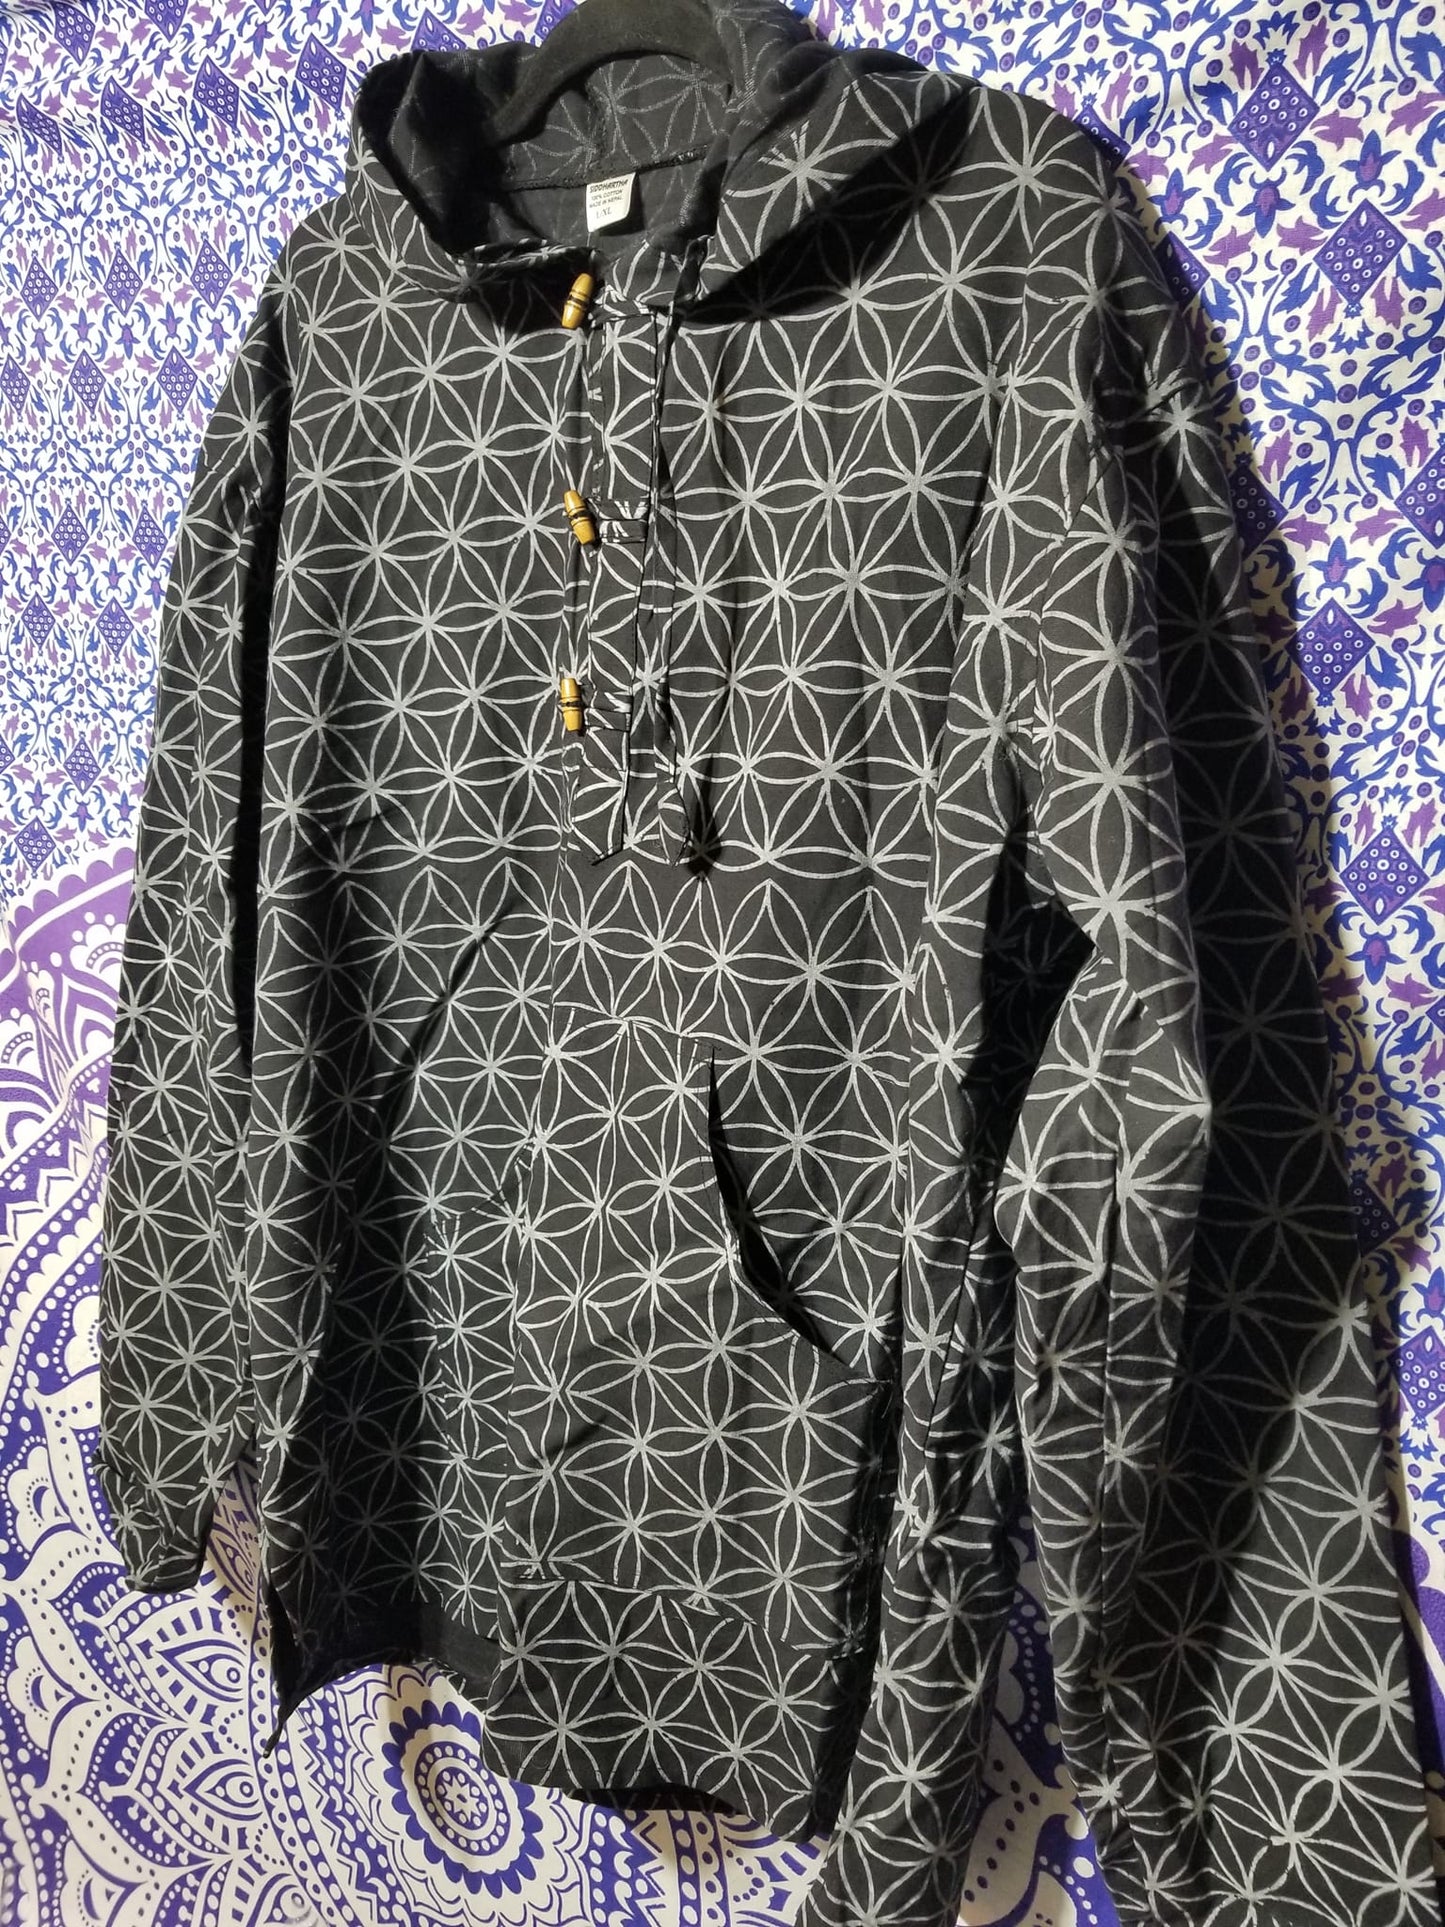 Cotton Flower of Life Hoodie